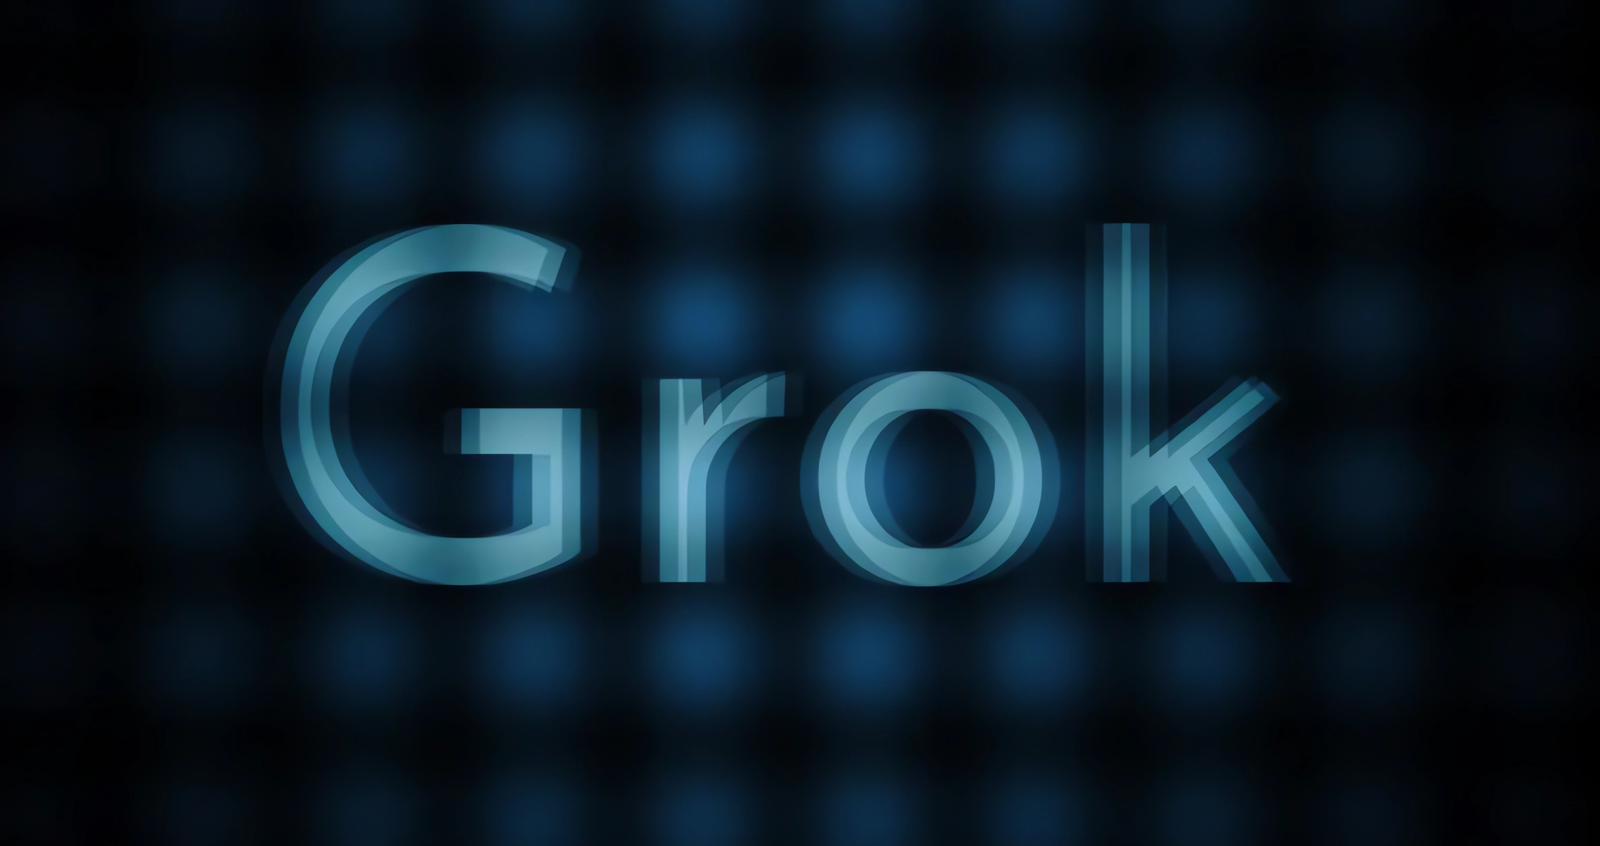 X collects user data for “Grok” AI training without consent